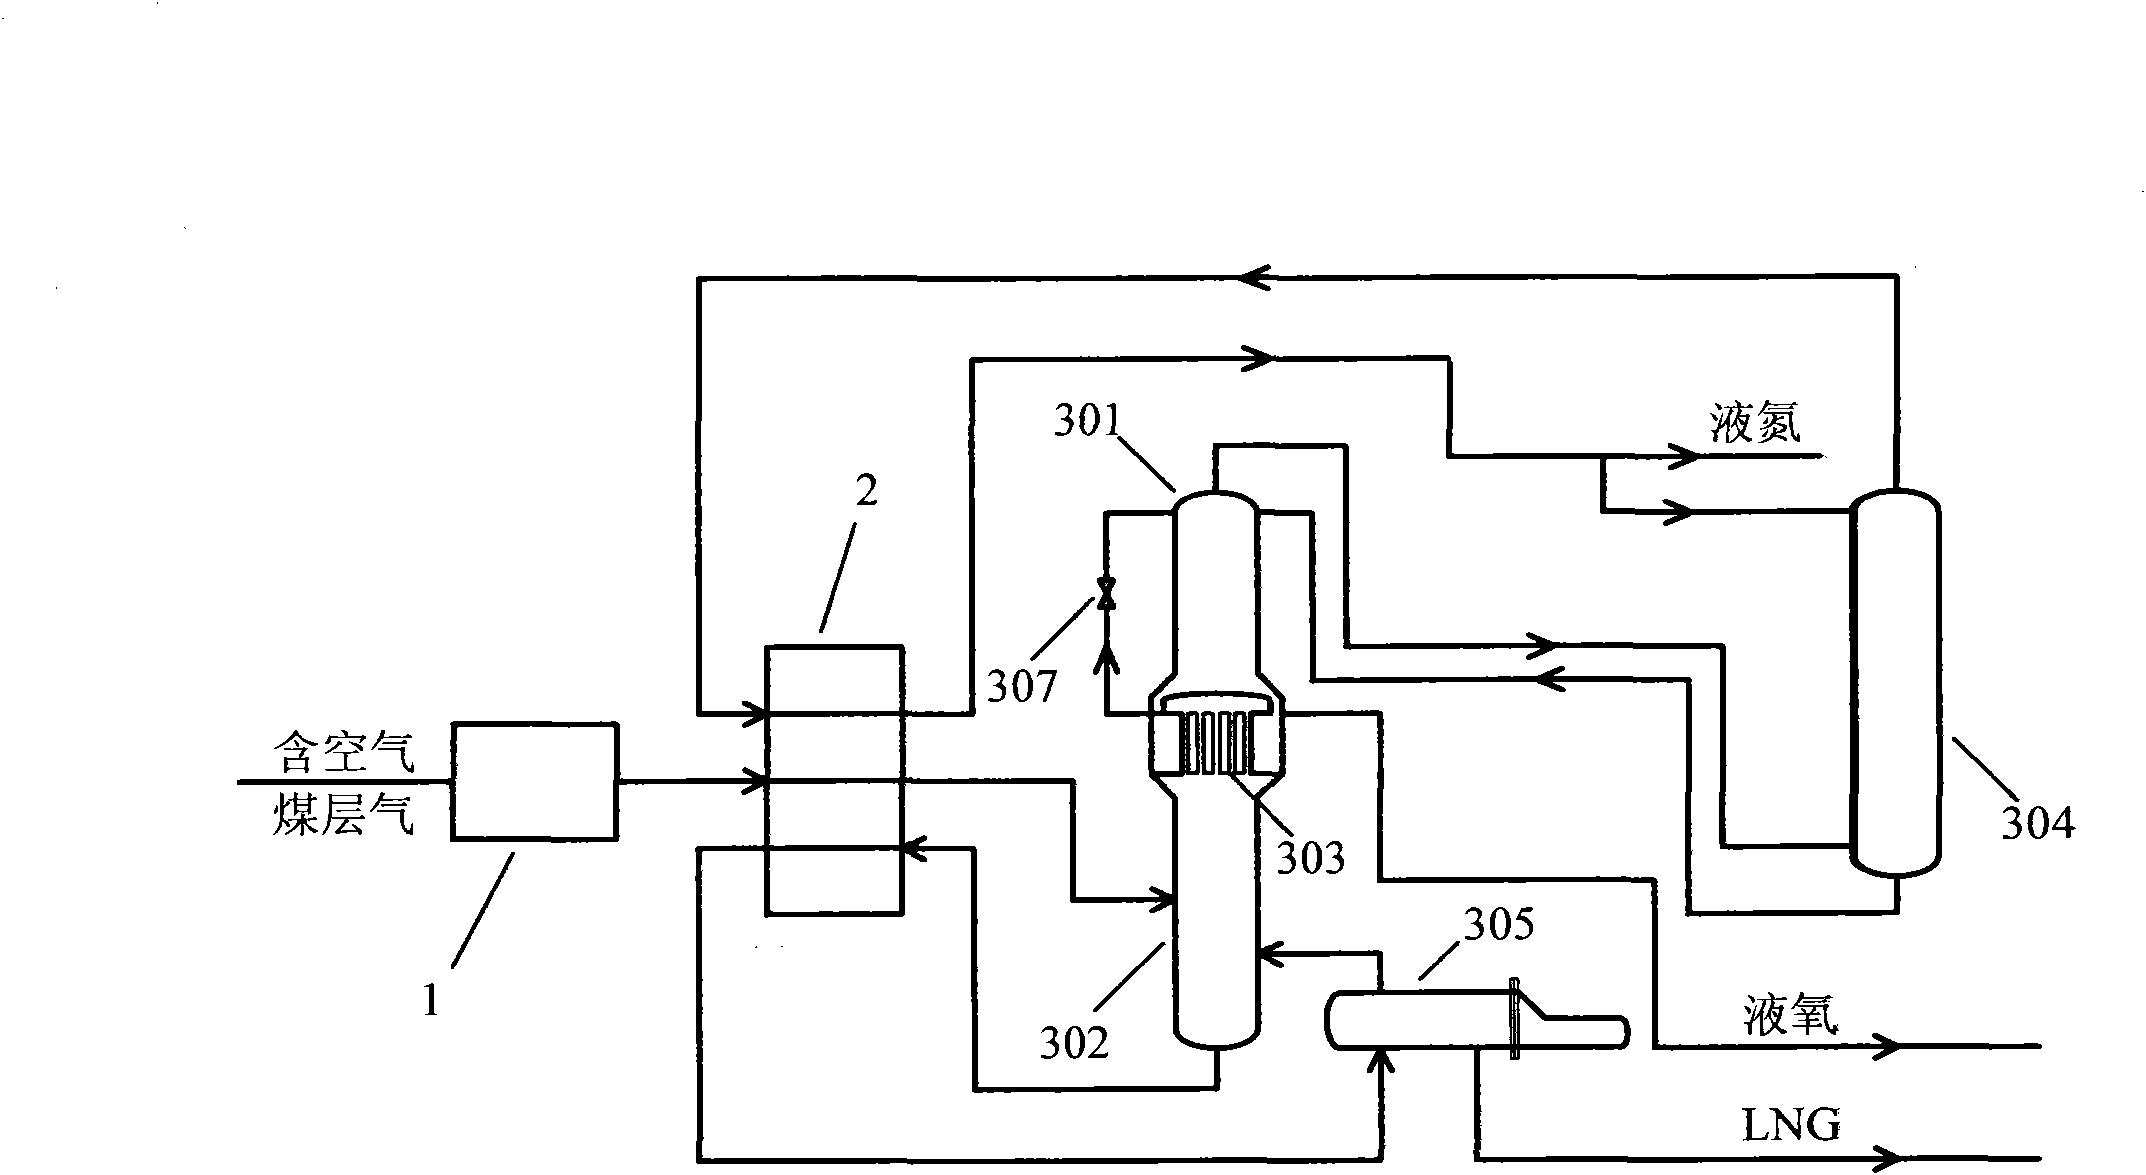 Full liquefying separation process for air-containing coal bed gas